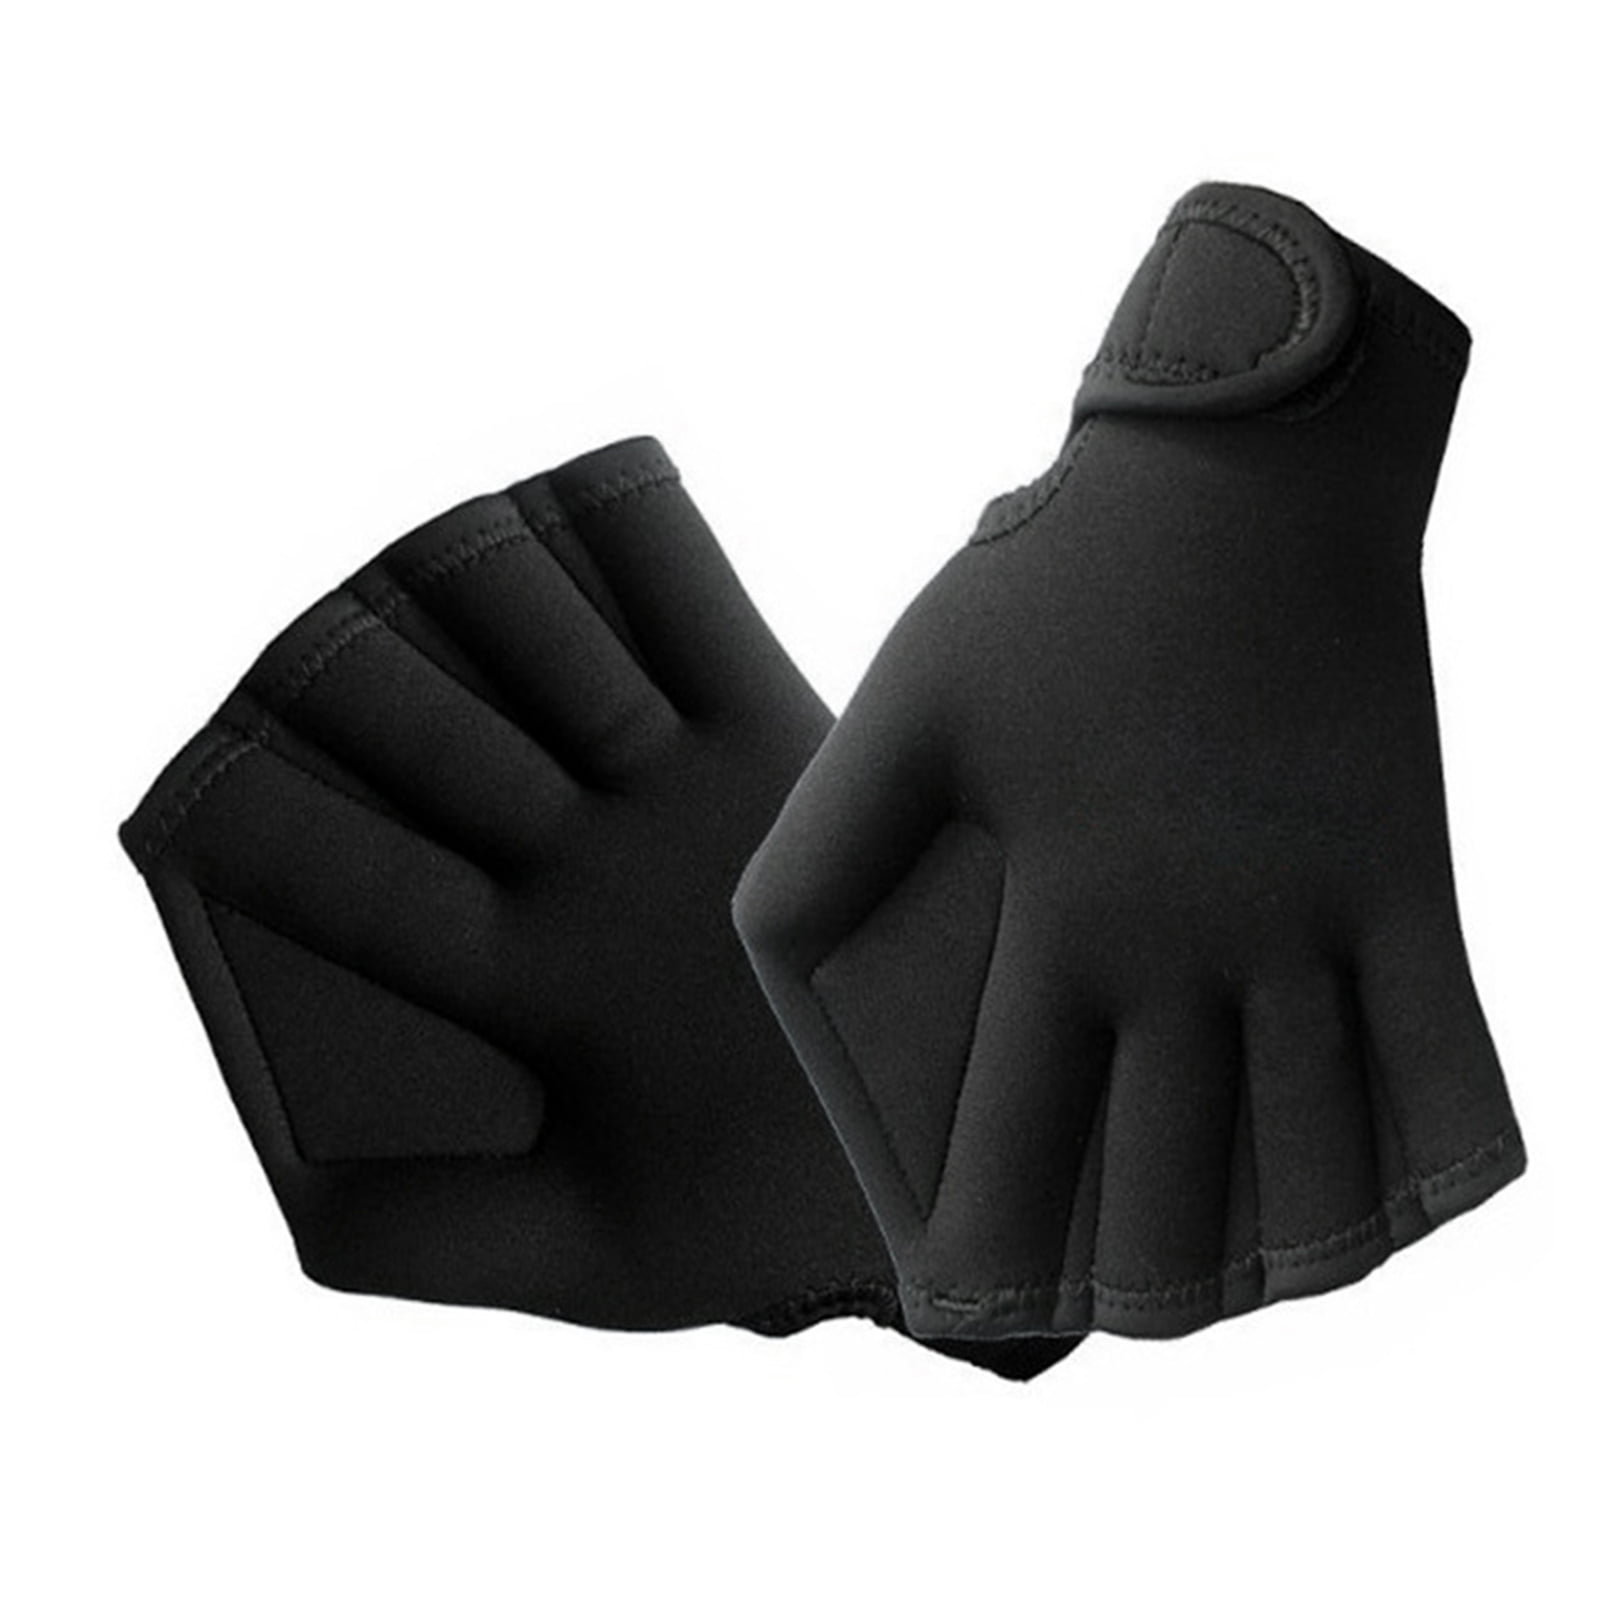 Powerful Aquatic Gloves Unisex Swimming Gloves Hand Paddles for Swimming Training Fins Water Resistance Neoprene Swim Gloves for Adults Black